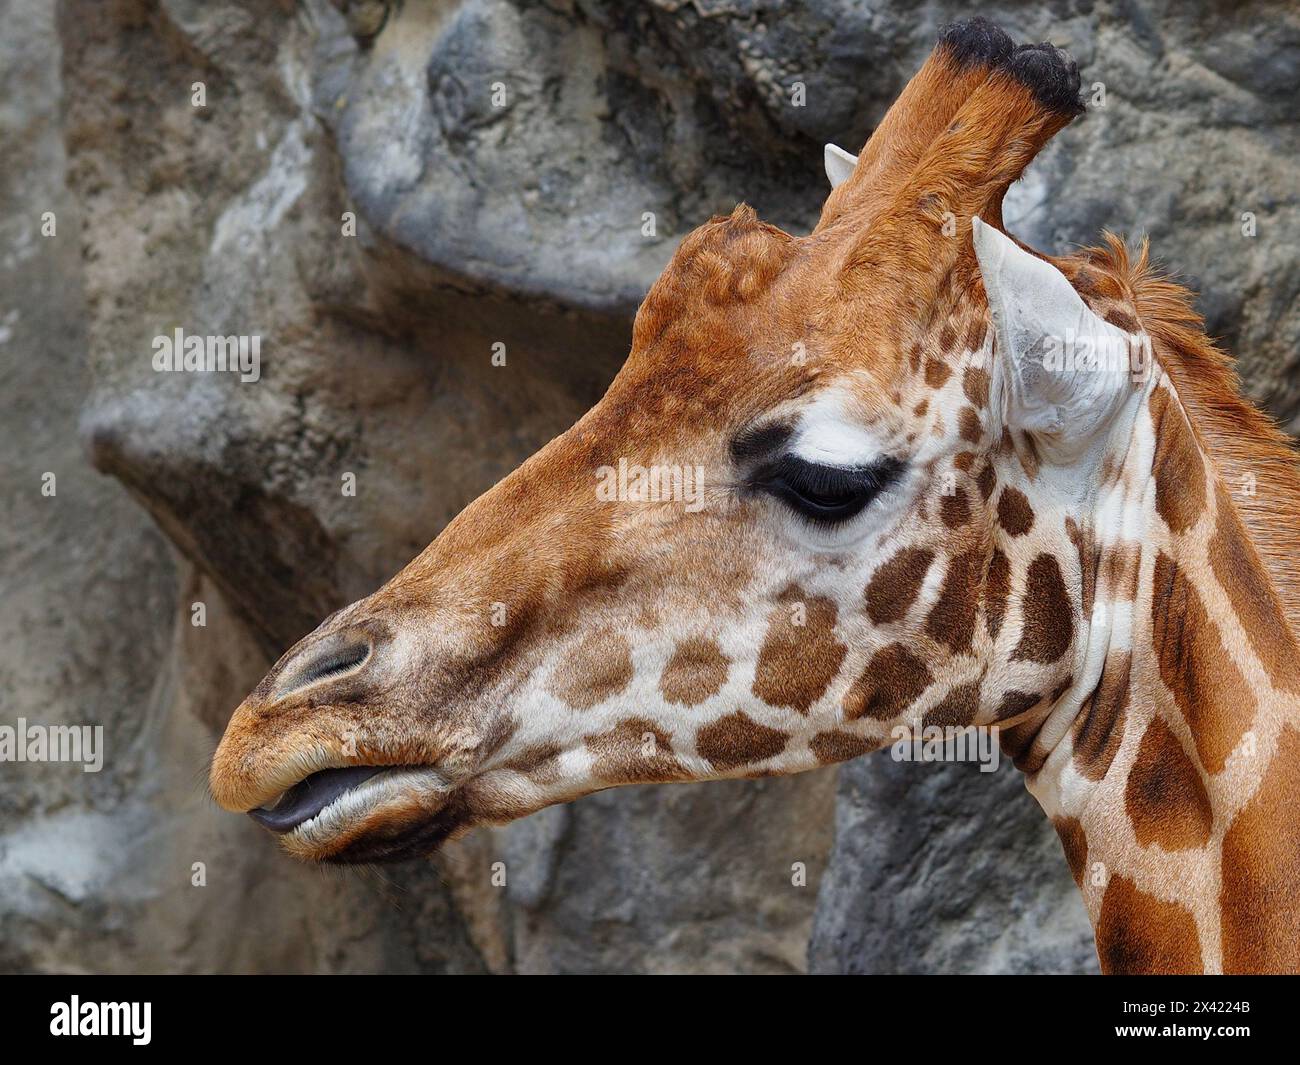 A closeup portrait of a wonderful appealing Giraffe with bright eyes and distinctive features. Stock Photo